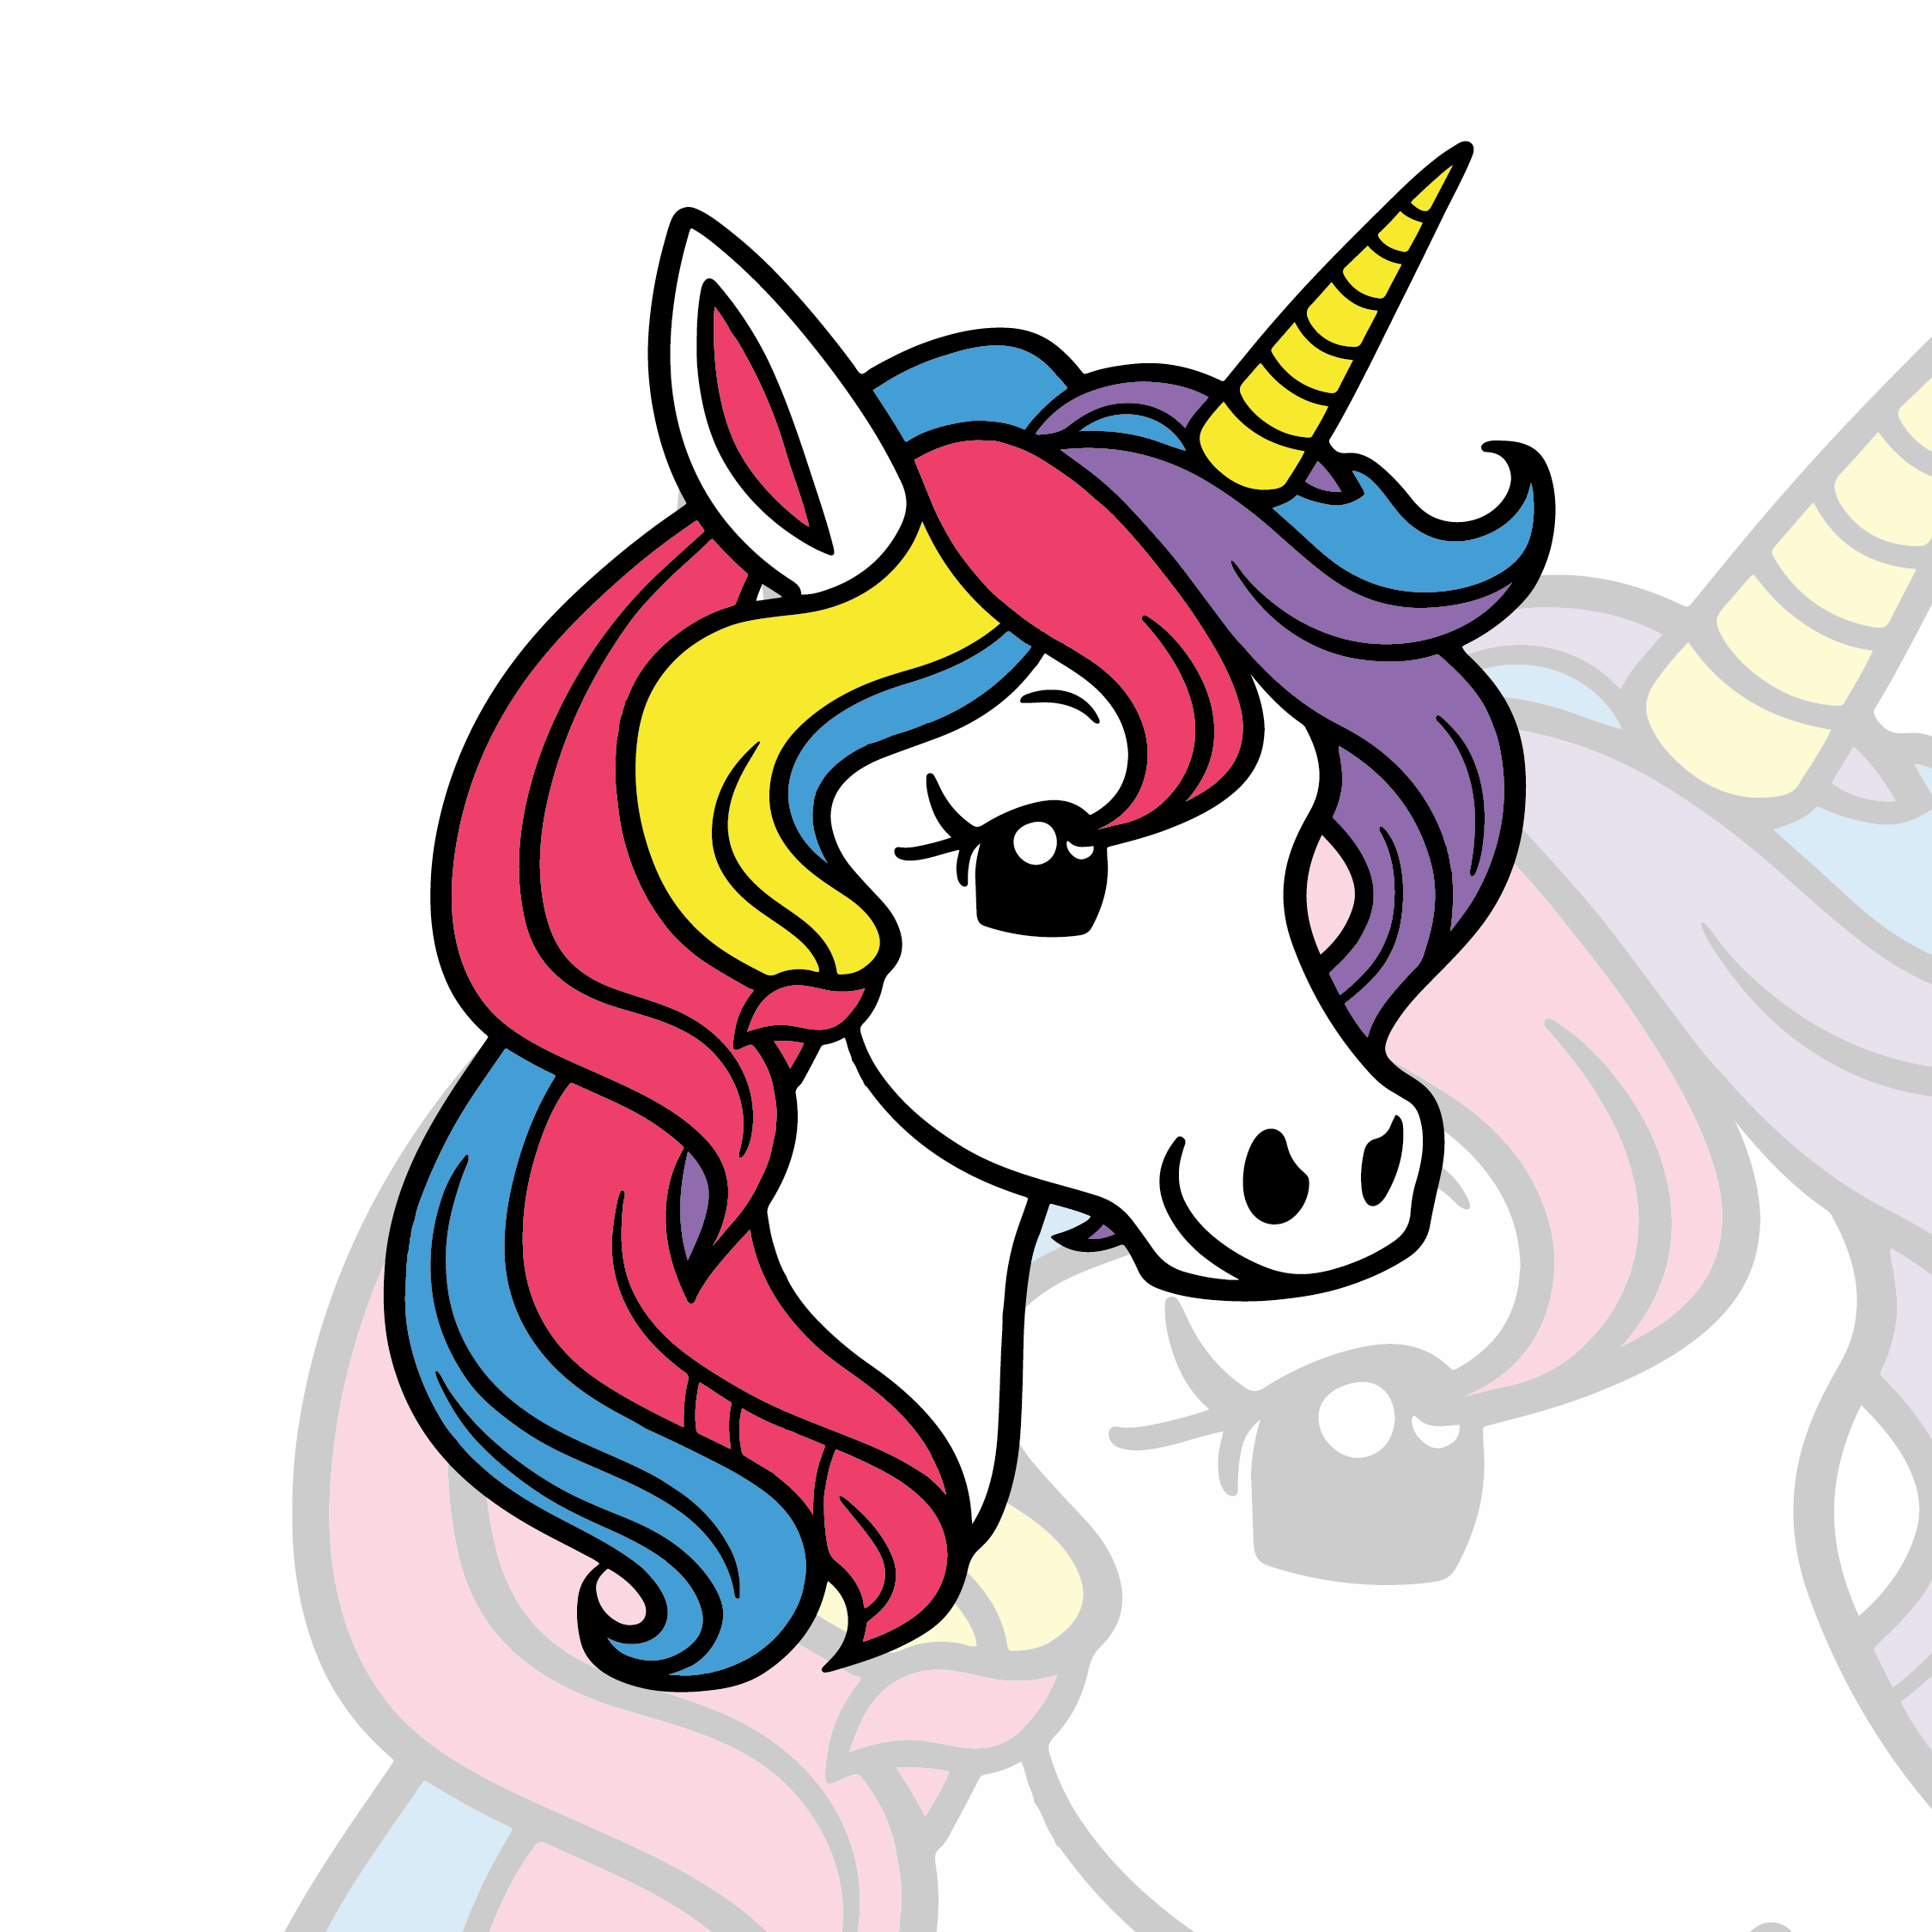 Drawing of a unicorn with a rainbow mane.